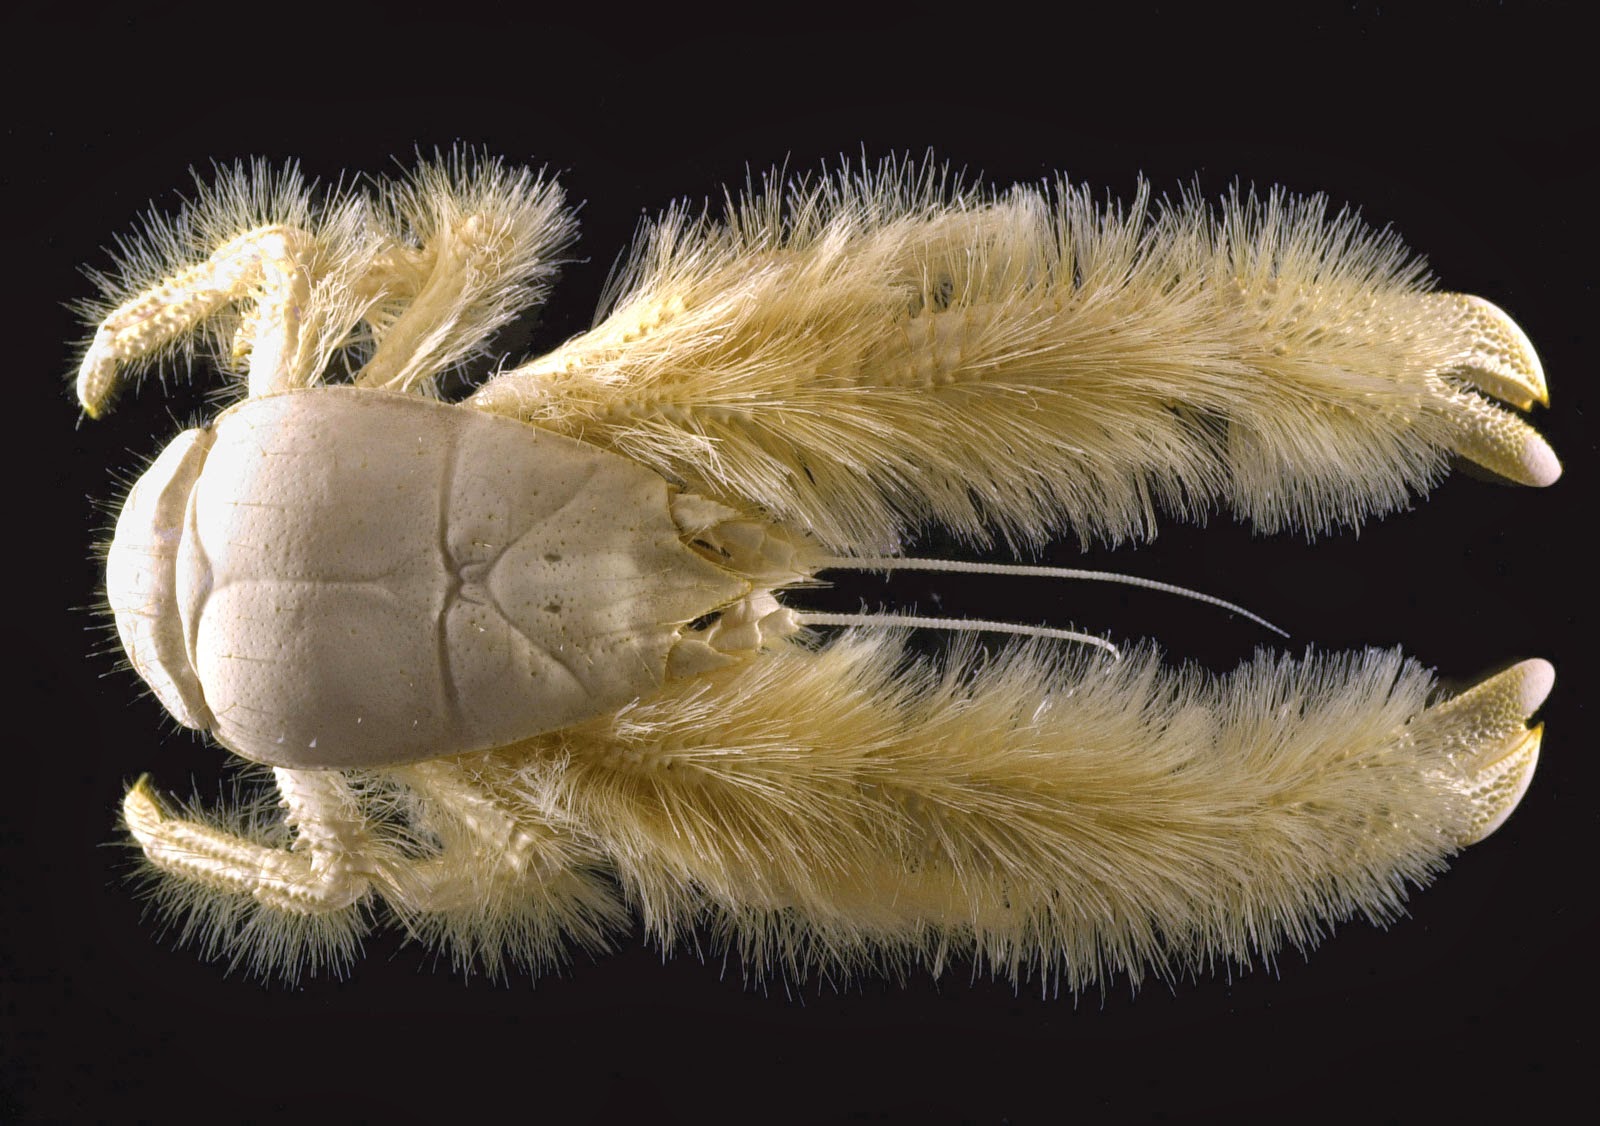 Animals You May Not Have Known Existed - Yeti Crab